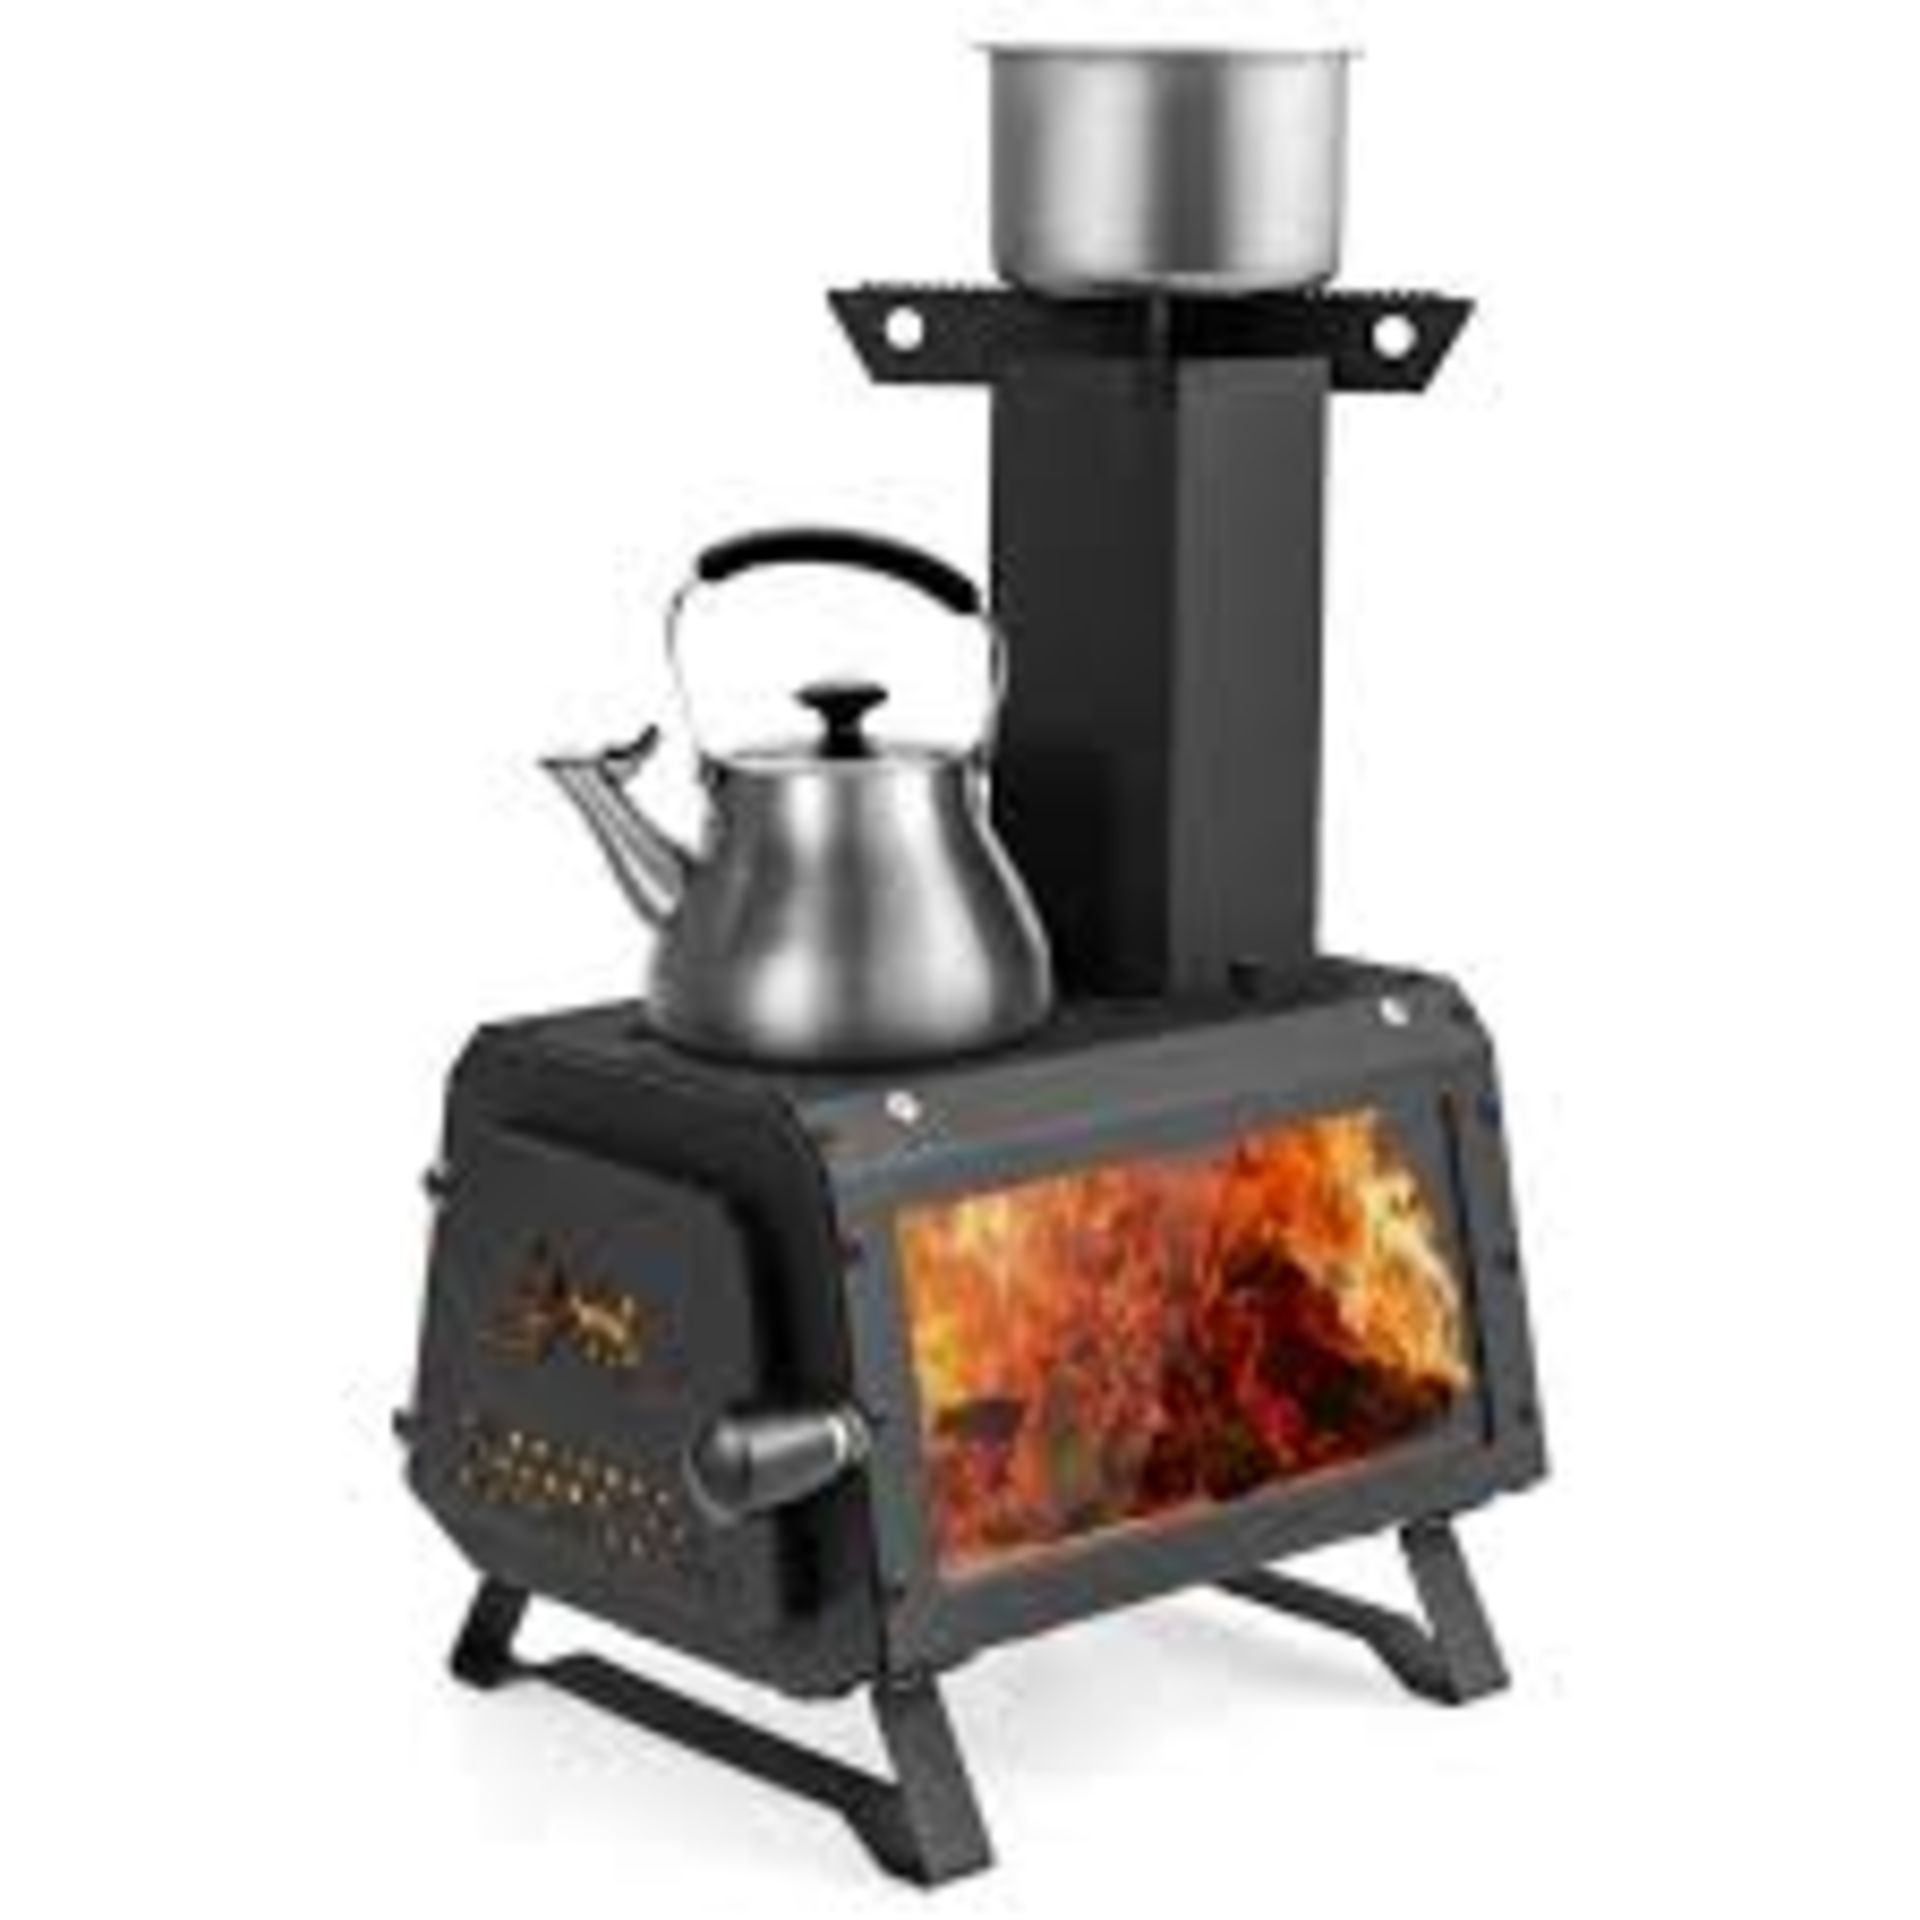 Portable Wood Burning Stove with 2 Cooking Positions. - R14.3. Enjoy a wonderful outdoor adventure